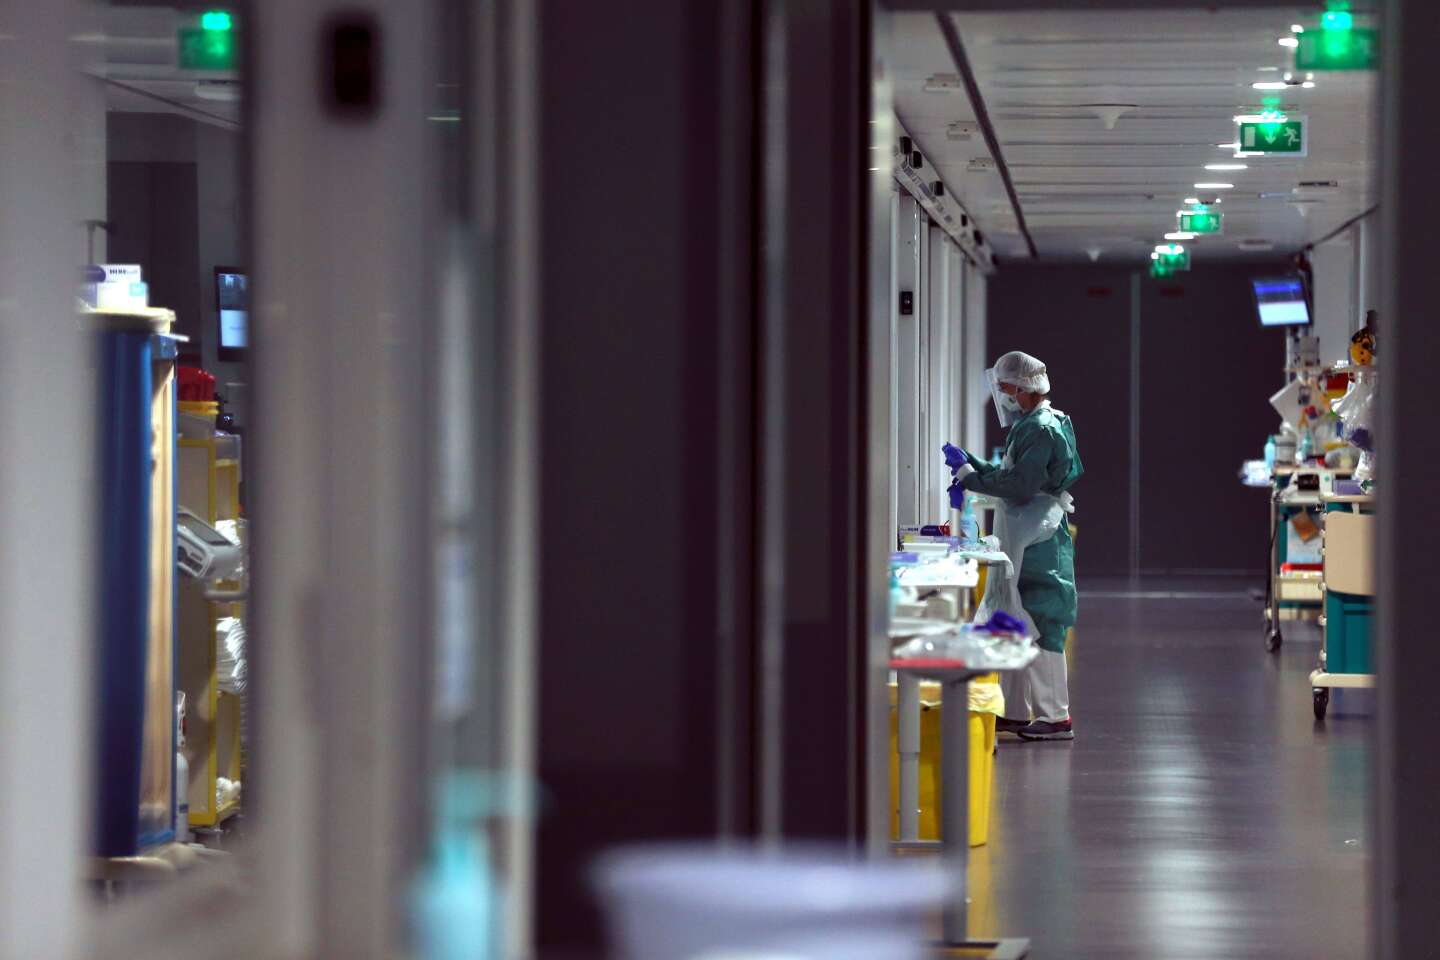 In France, hospitals are being asked to reduce their carbon footprint